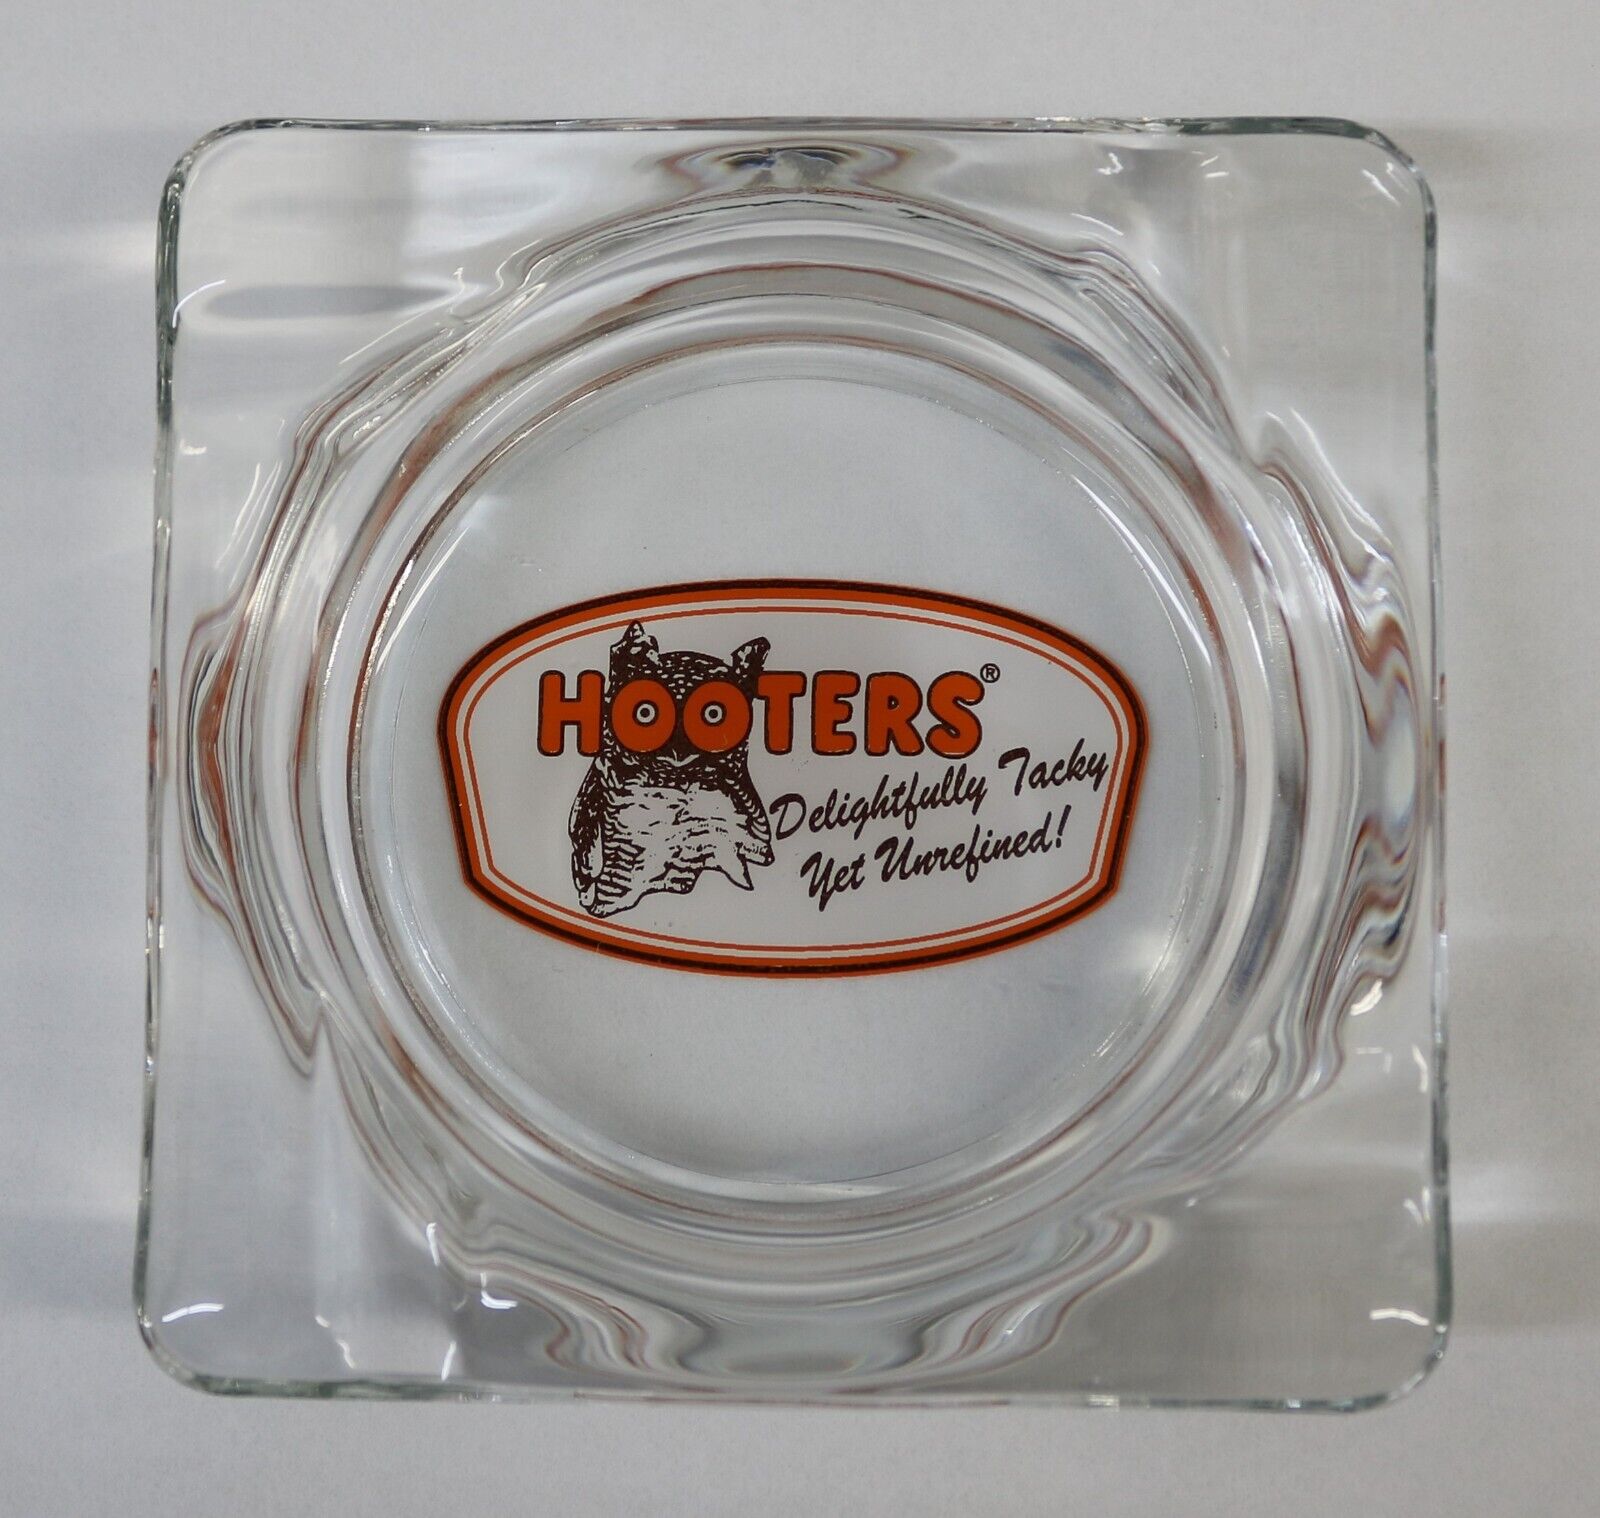 VTG Limited Edition Hooters Square Glass Screen Printed Ashtray 